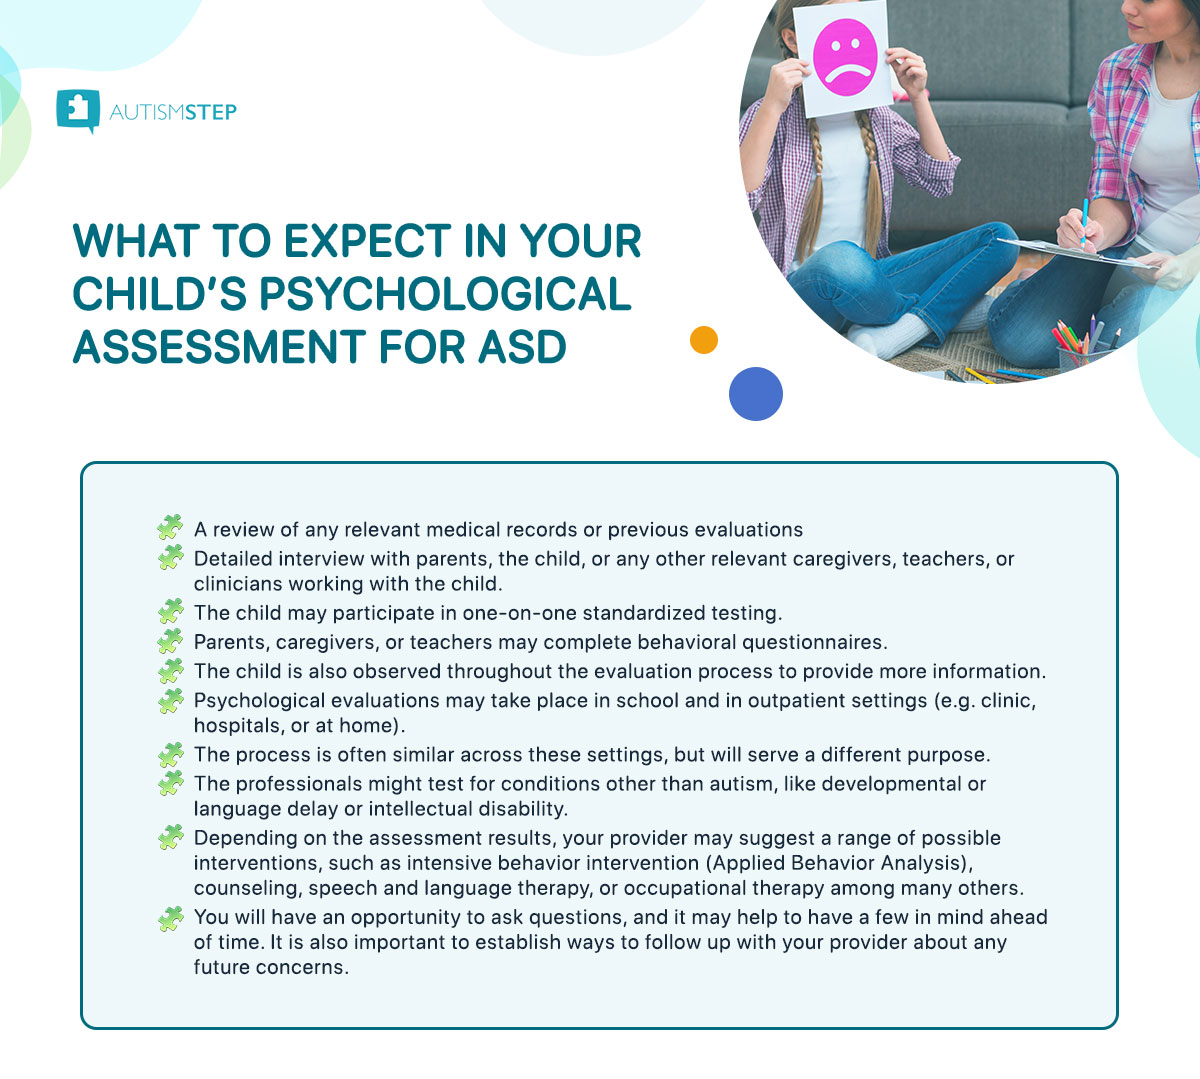 AutismSTEP Singapore - Psychological Assessment for Children with Autism